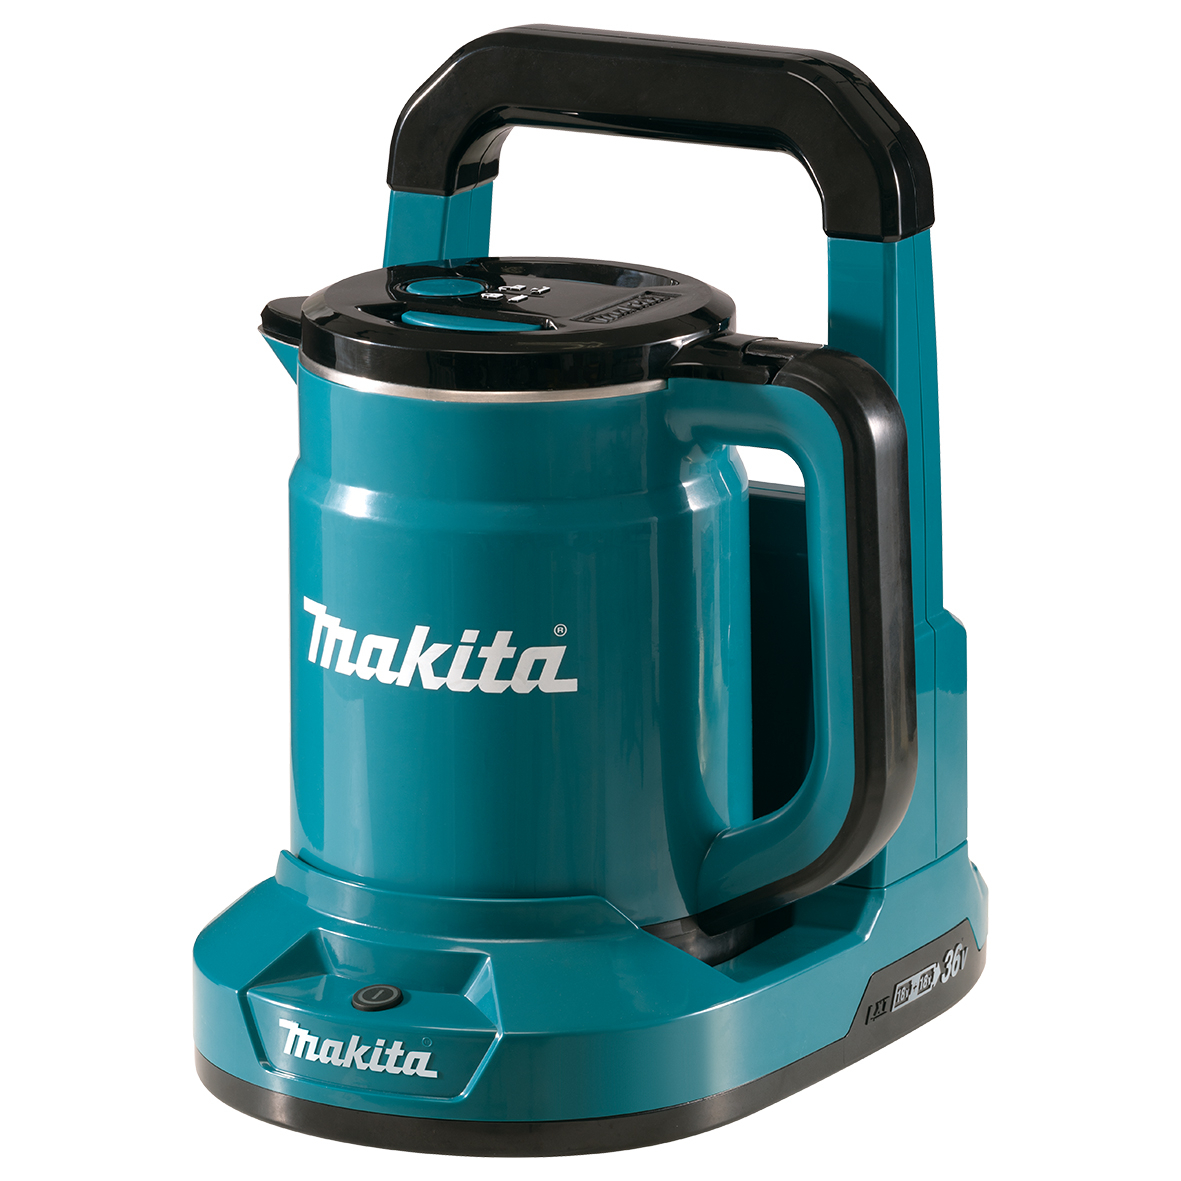 Makita 18Vx2 800ml Kettle (tool only)